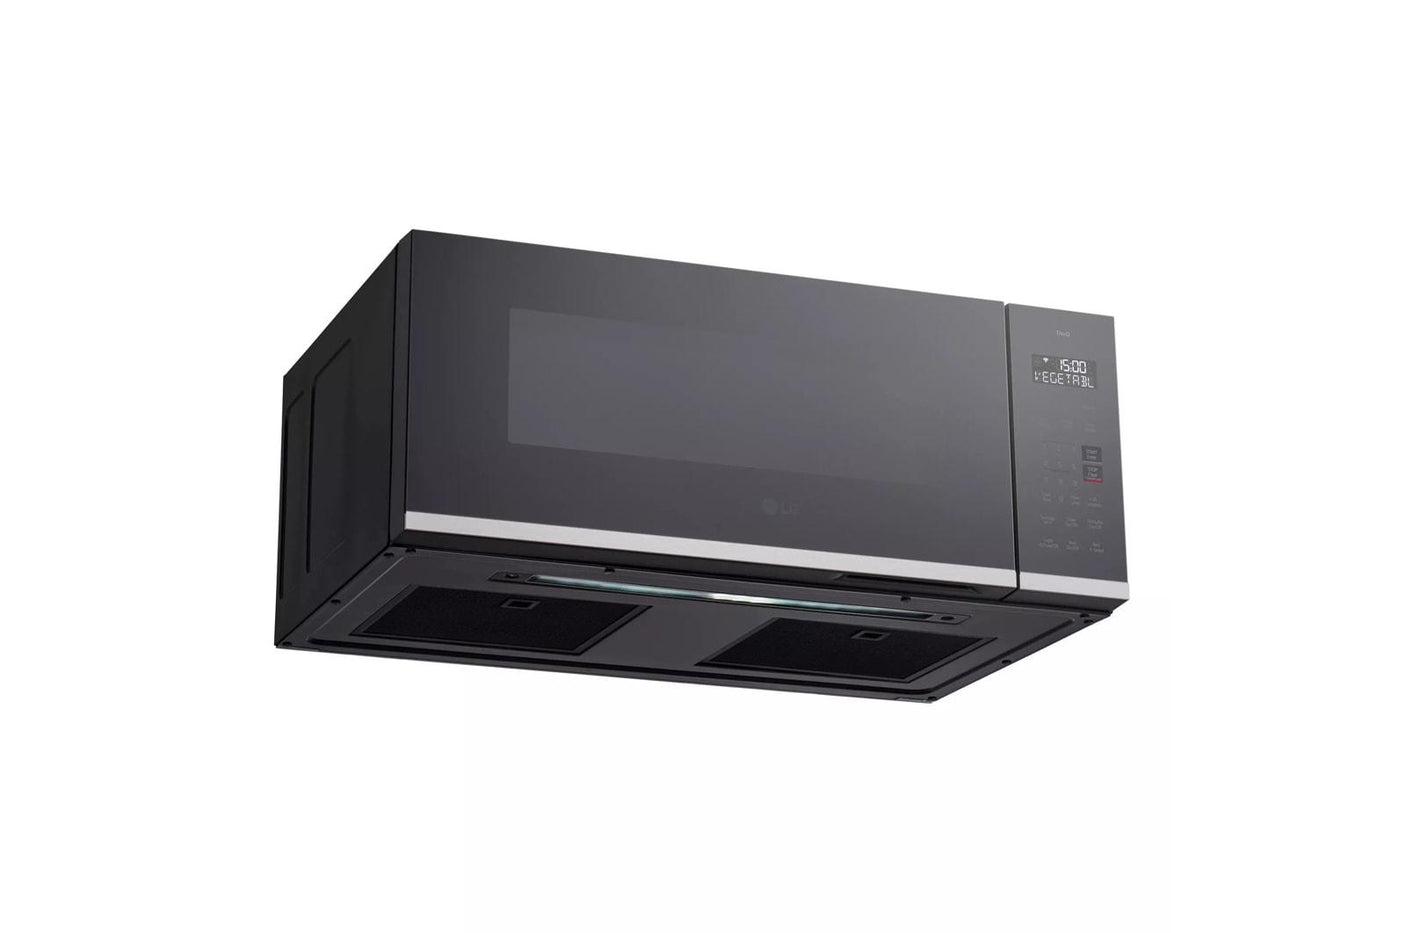 1.3 cu. ft. Smart Low Profile Over-the-Range Microwave Oven